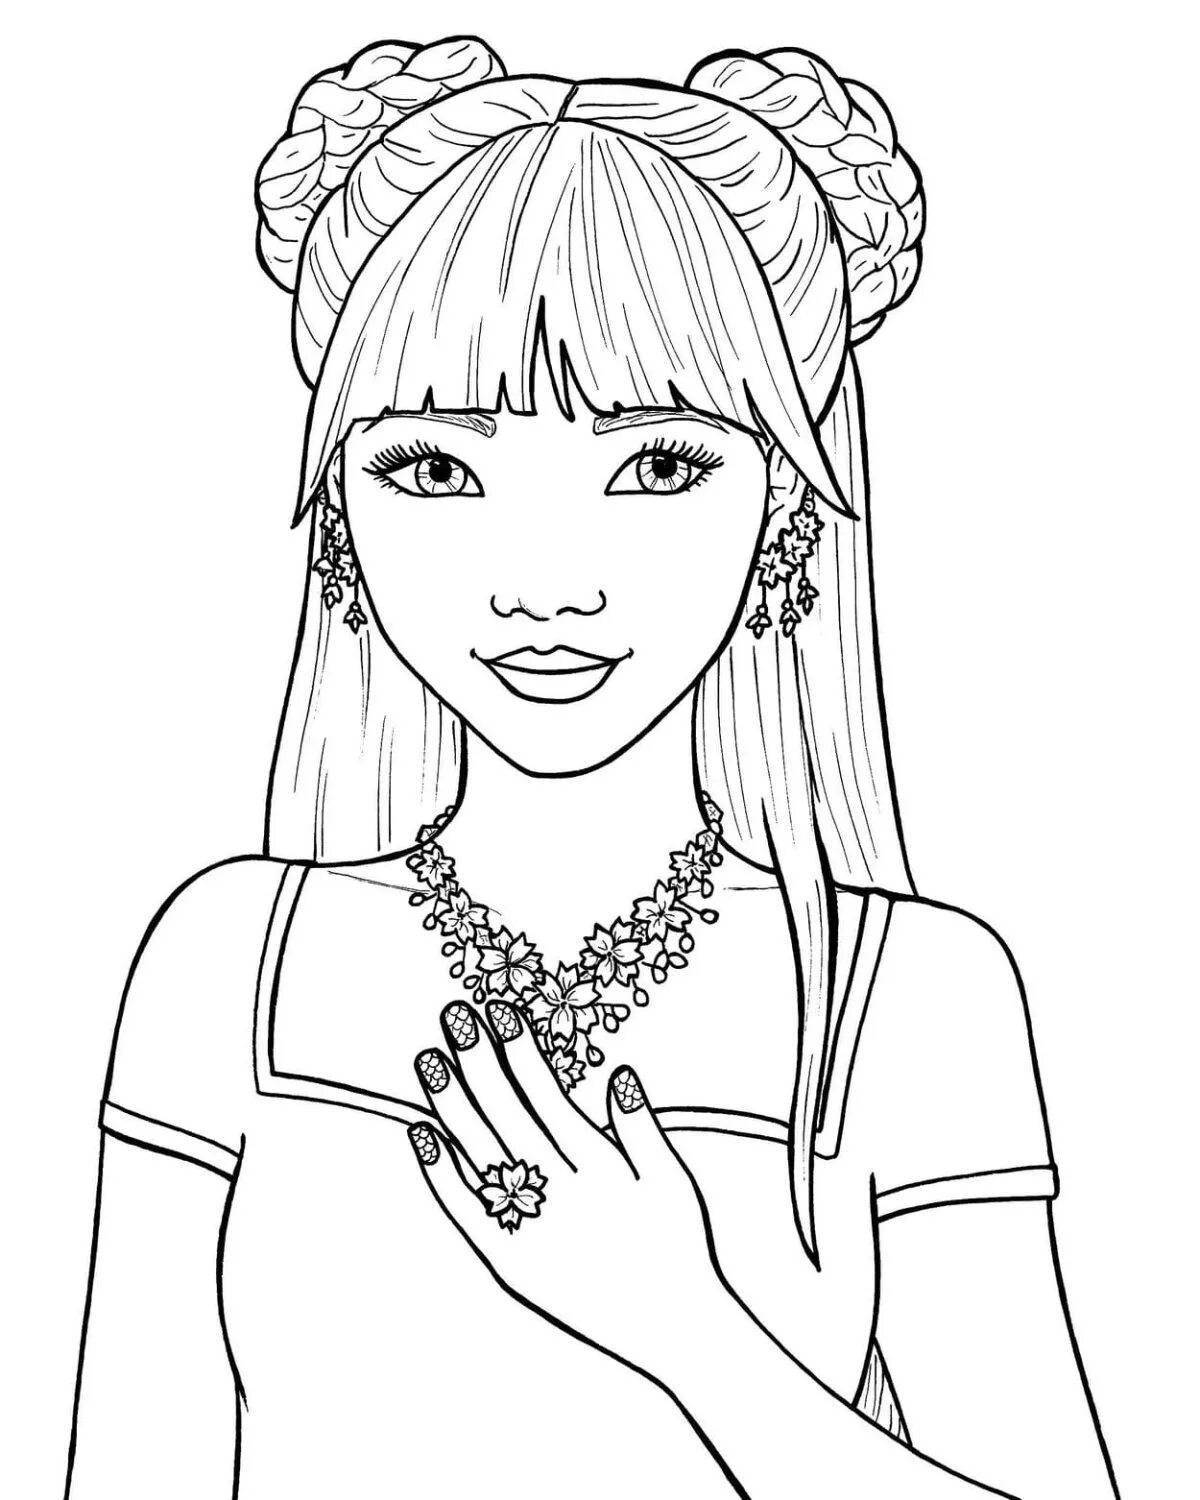 Color-frenzy coloring page miss tee